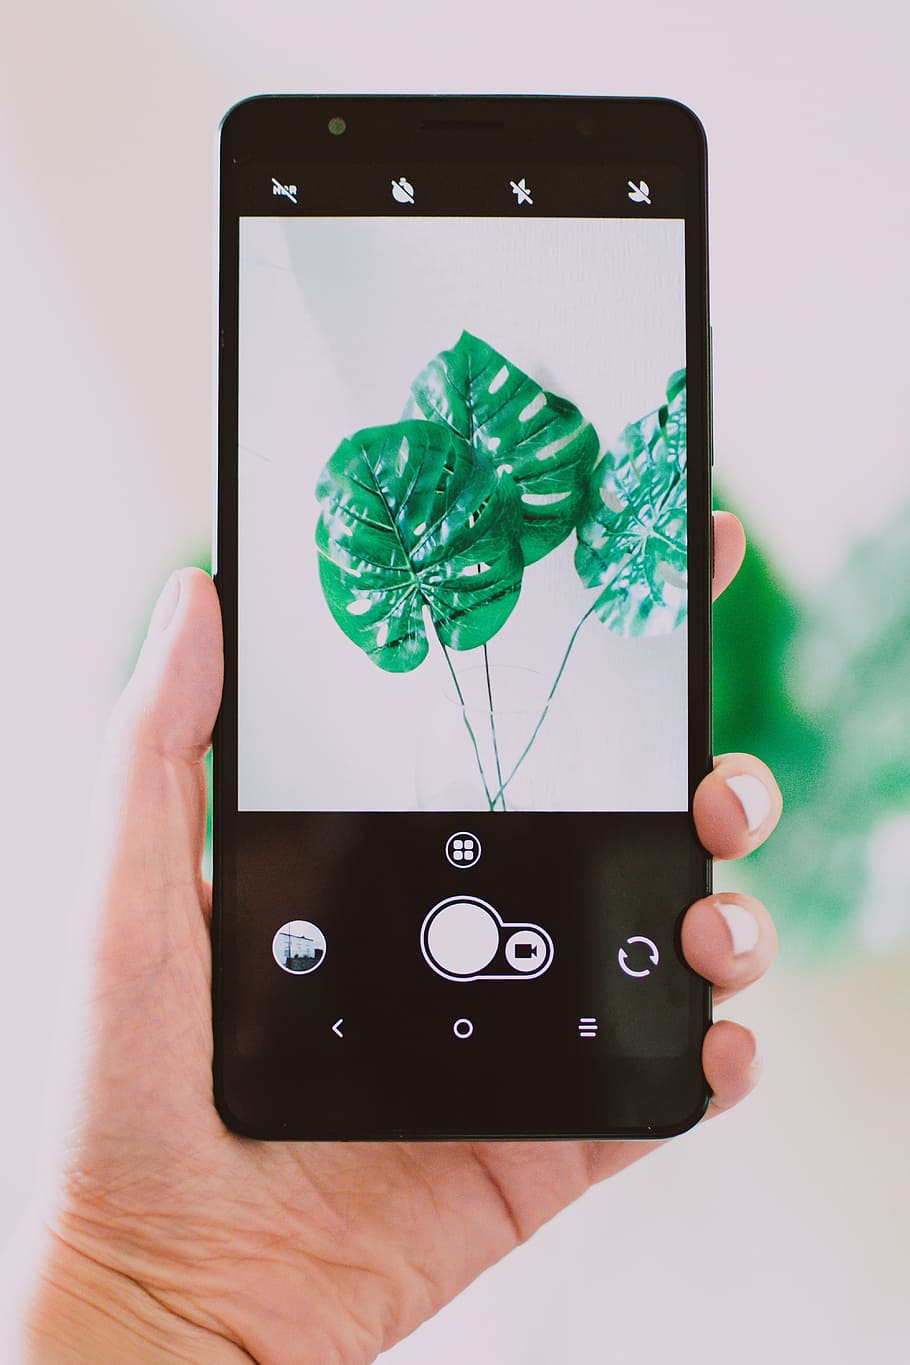 mobile, photograph, plant, green, nature, device, technology, app, mobile phone, cellphone